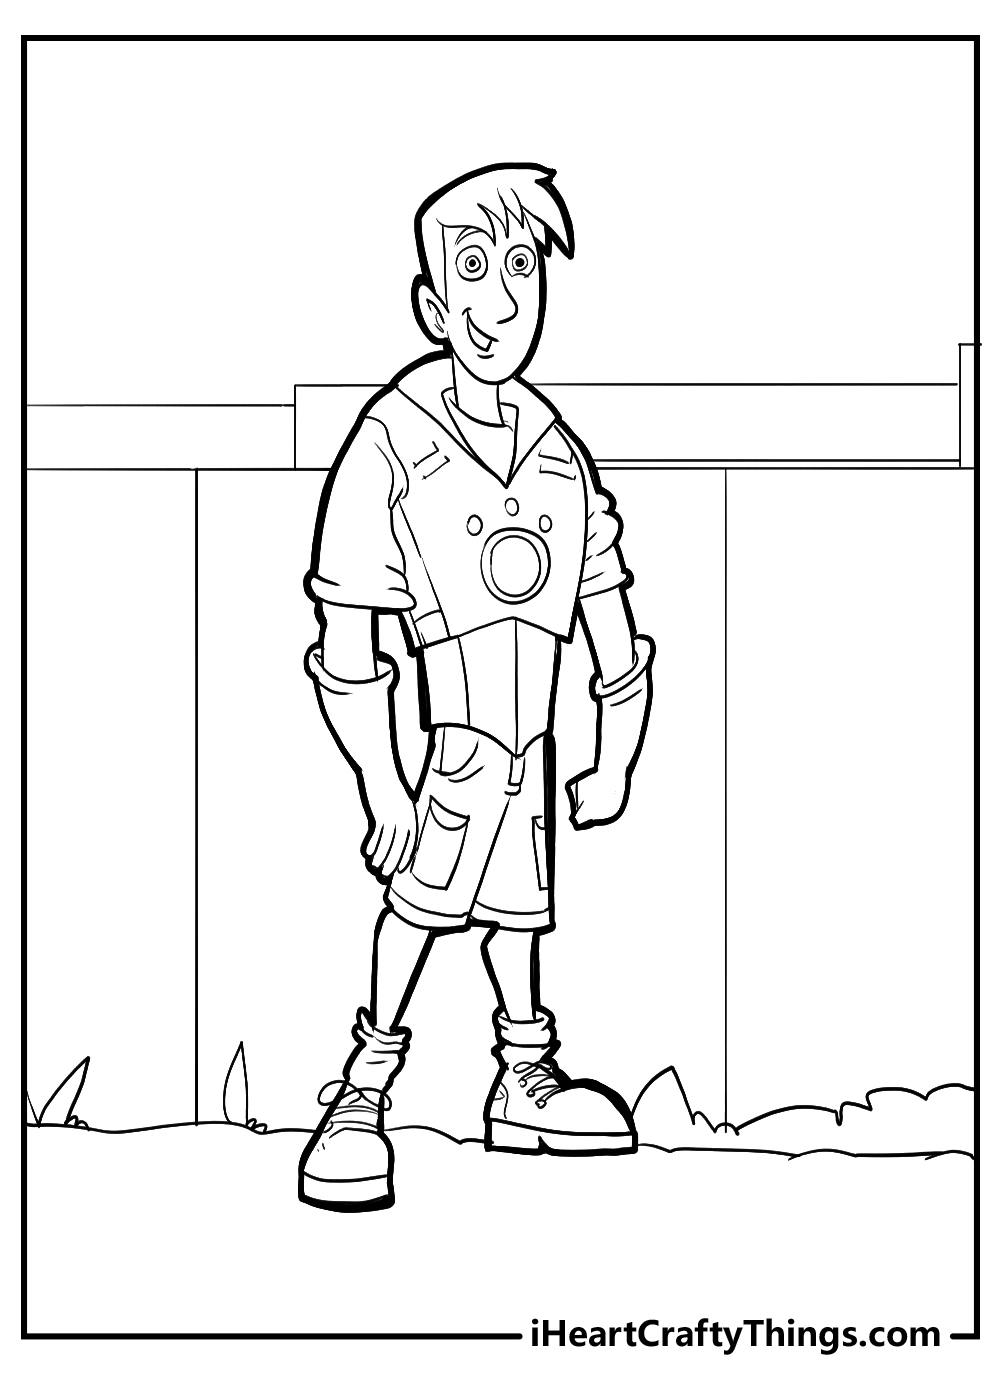 New Wild Kratts Coloring Sheet